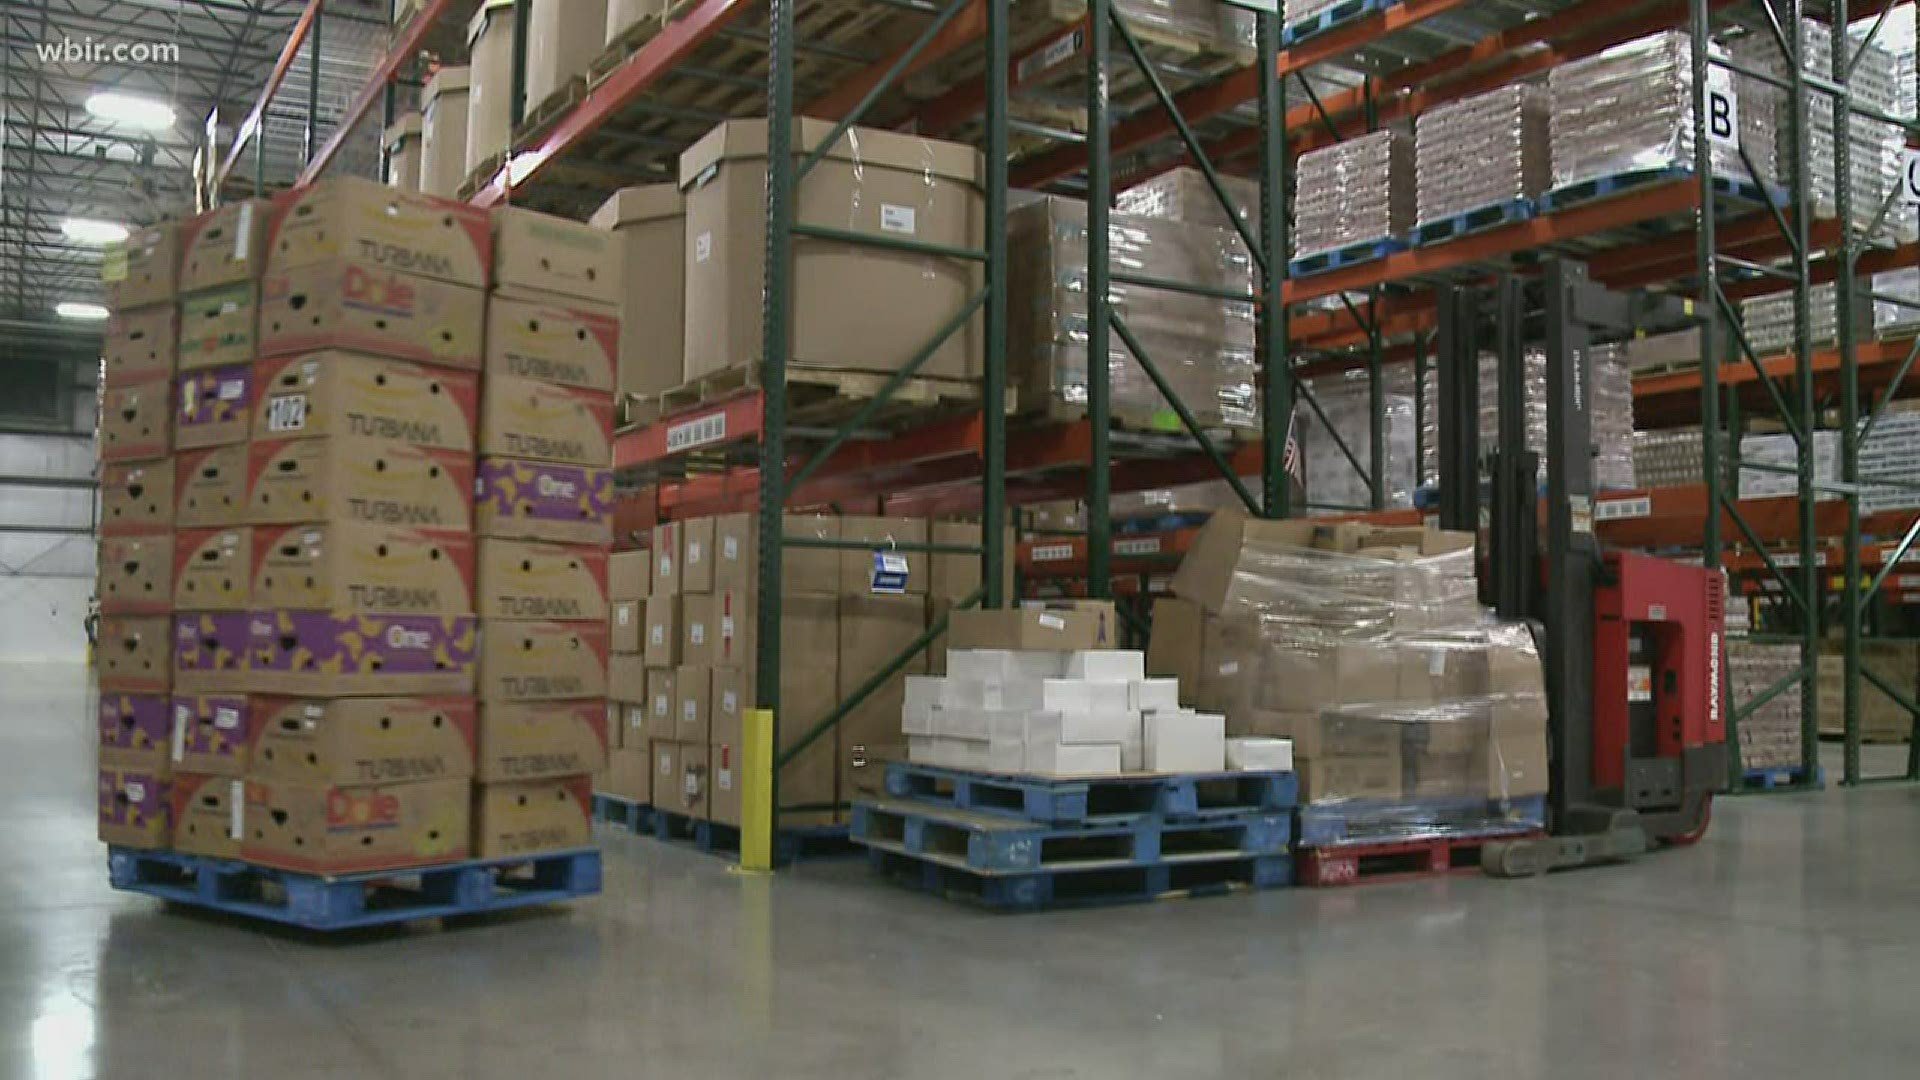 Second Harvest Food Bank of East Tennessee is in great need of essential resources to aid in the response to COVID-19.